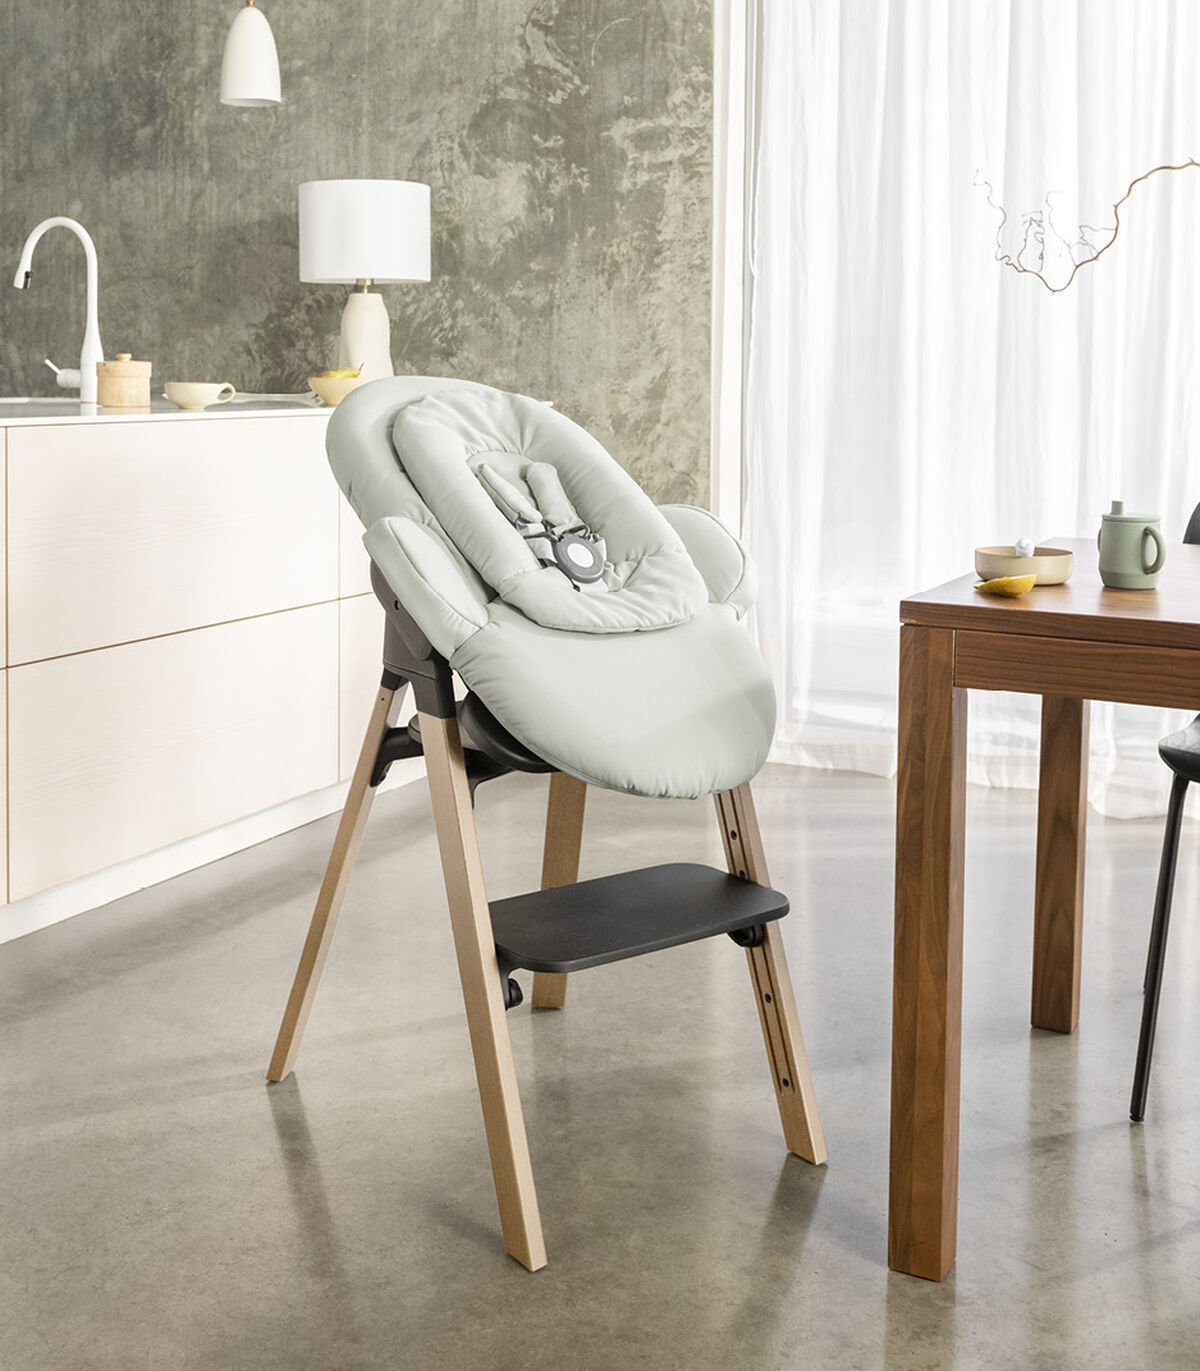 STOKKE Steps High Chair - ANB Baby -7040356349005$300 - $500